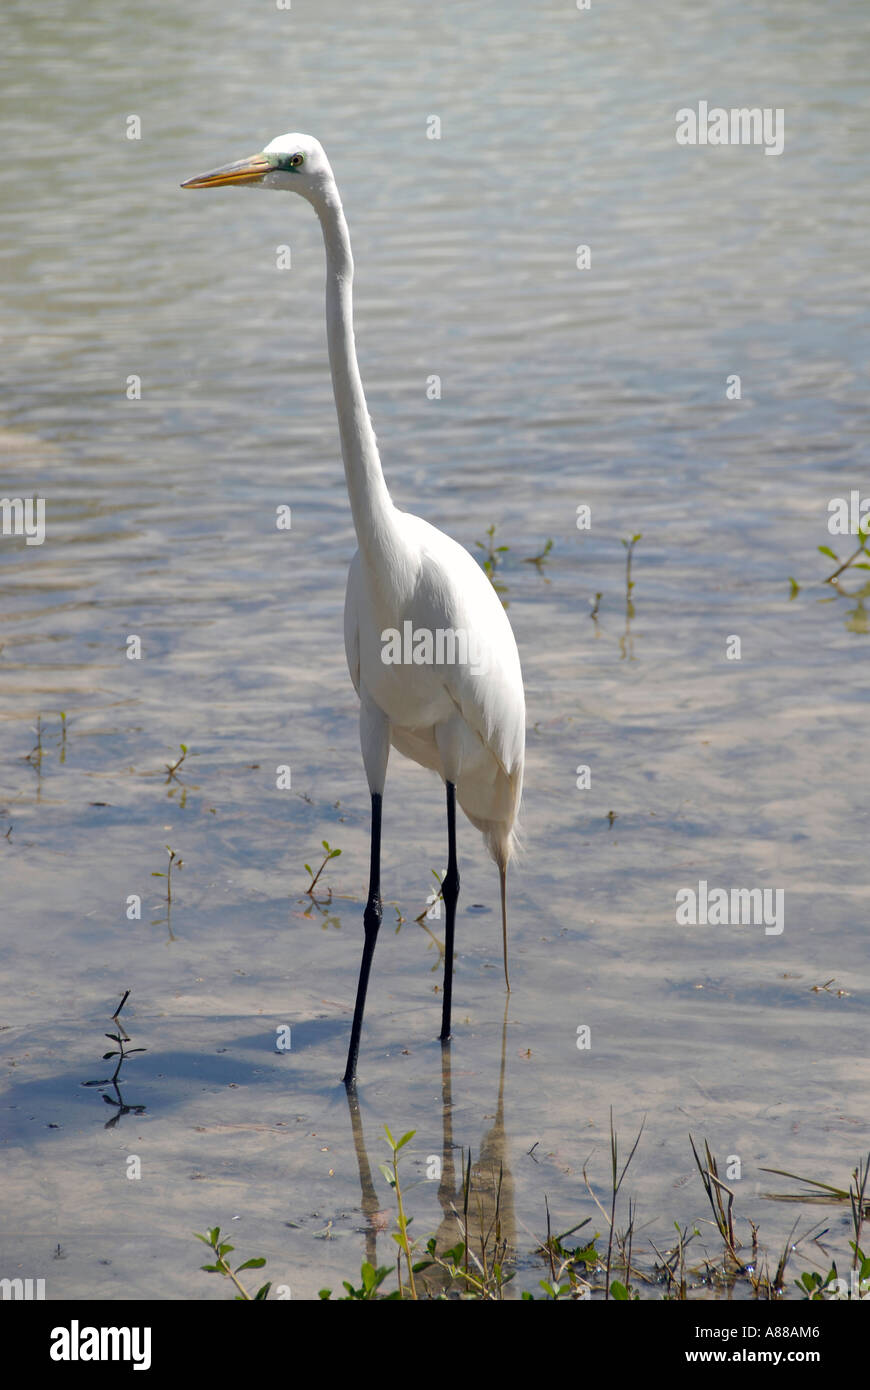 Great White Heron in Ocala National Forest Florida Stock Photo